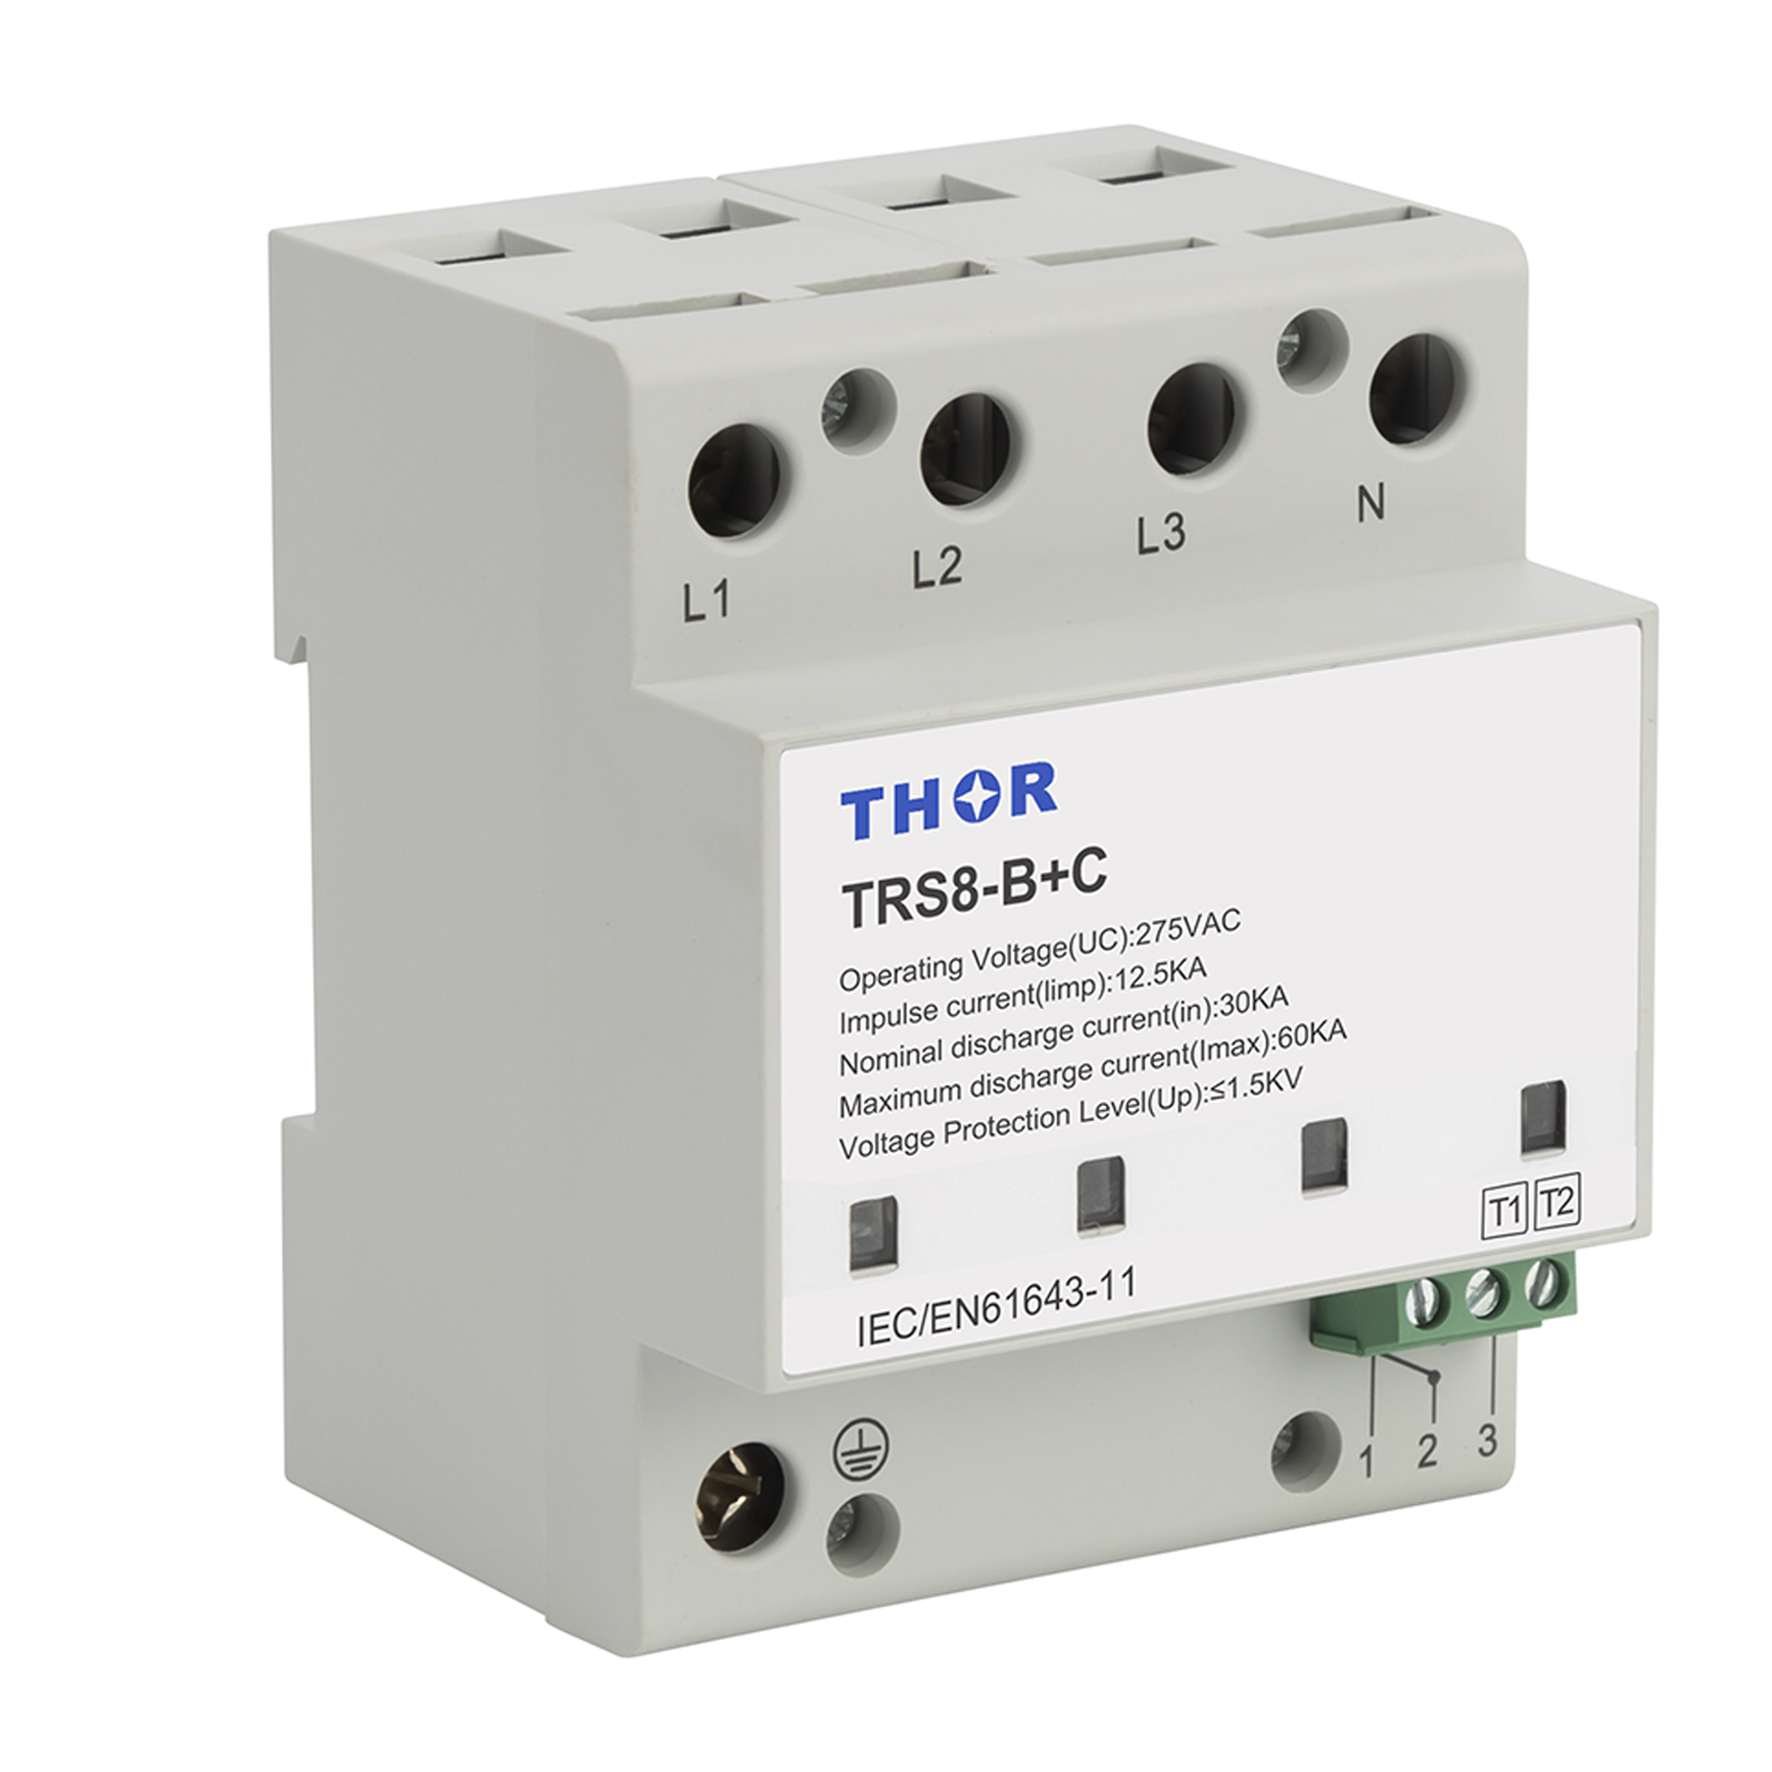 Type 1+2 AC surge protection device TRS8 series